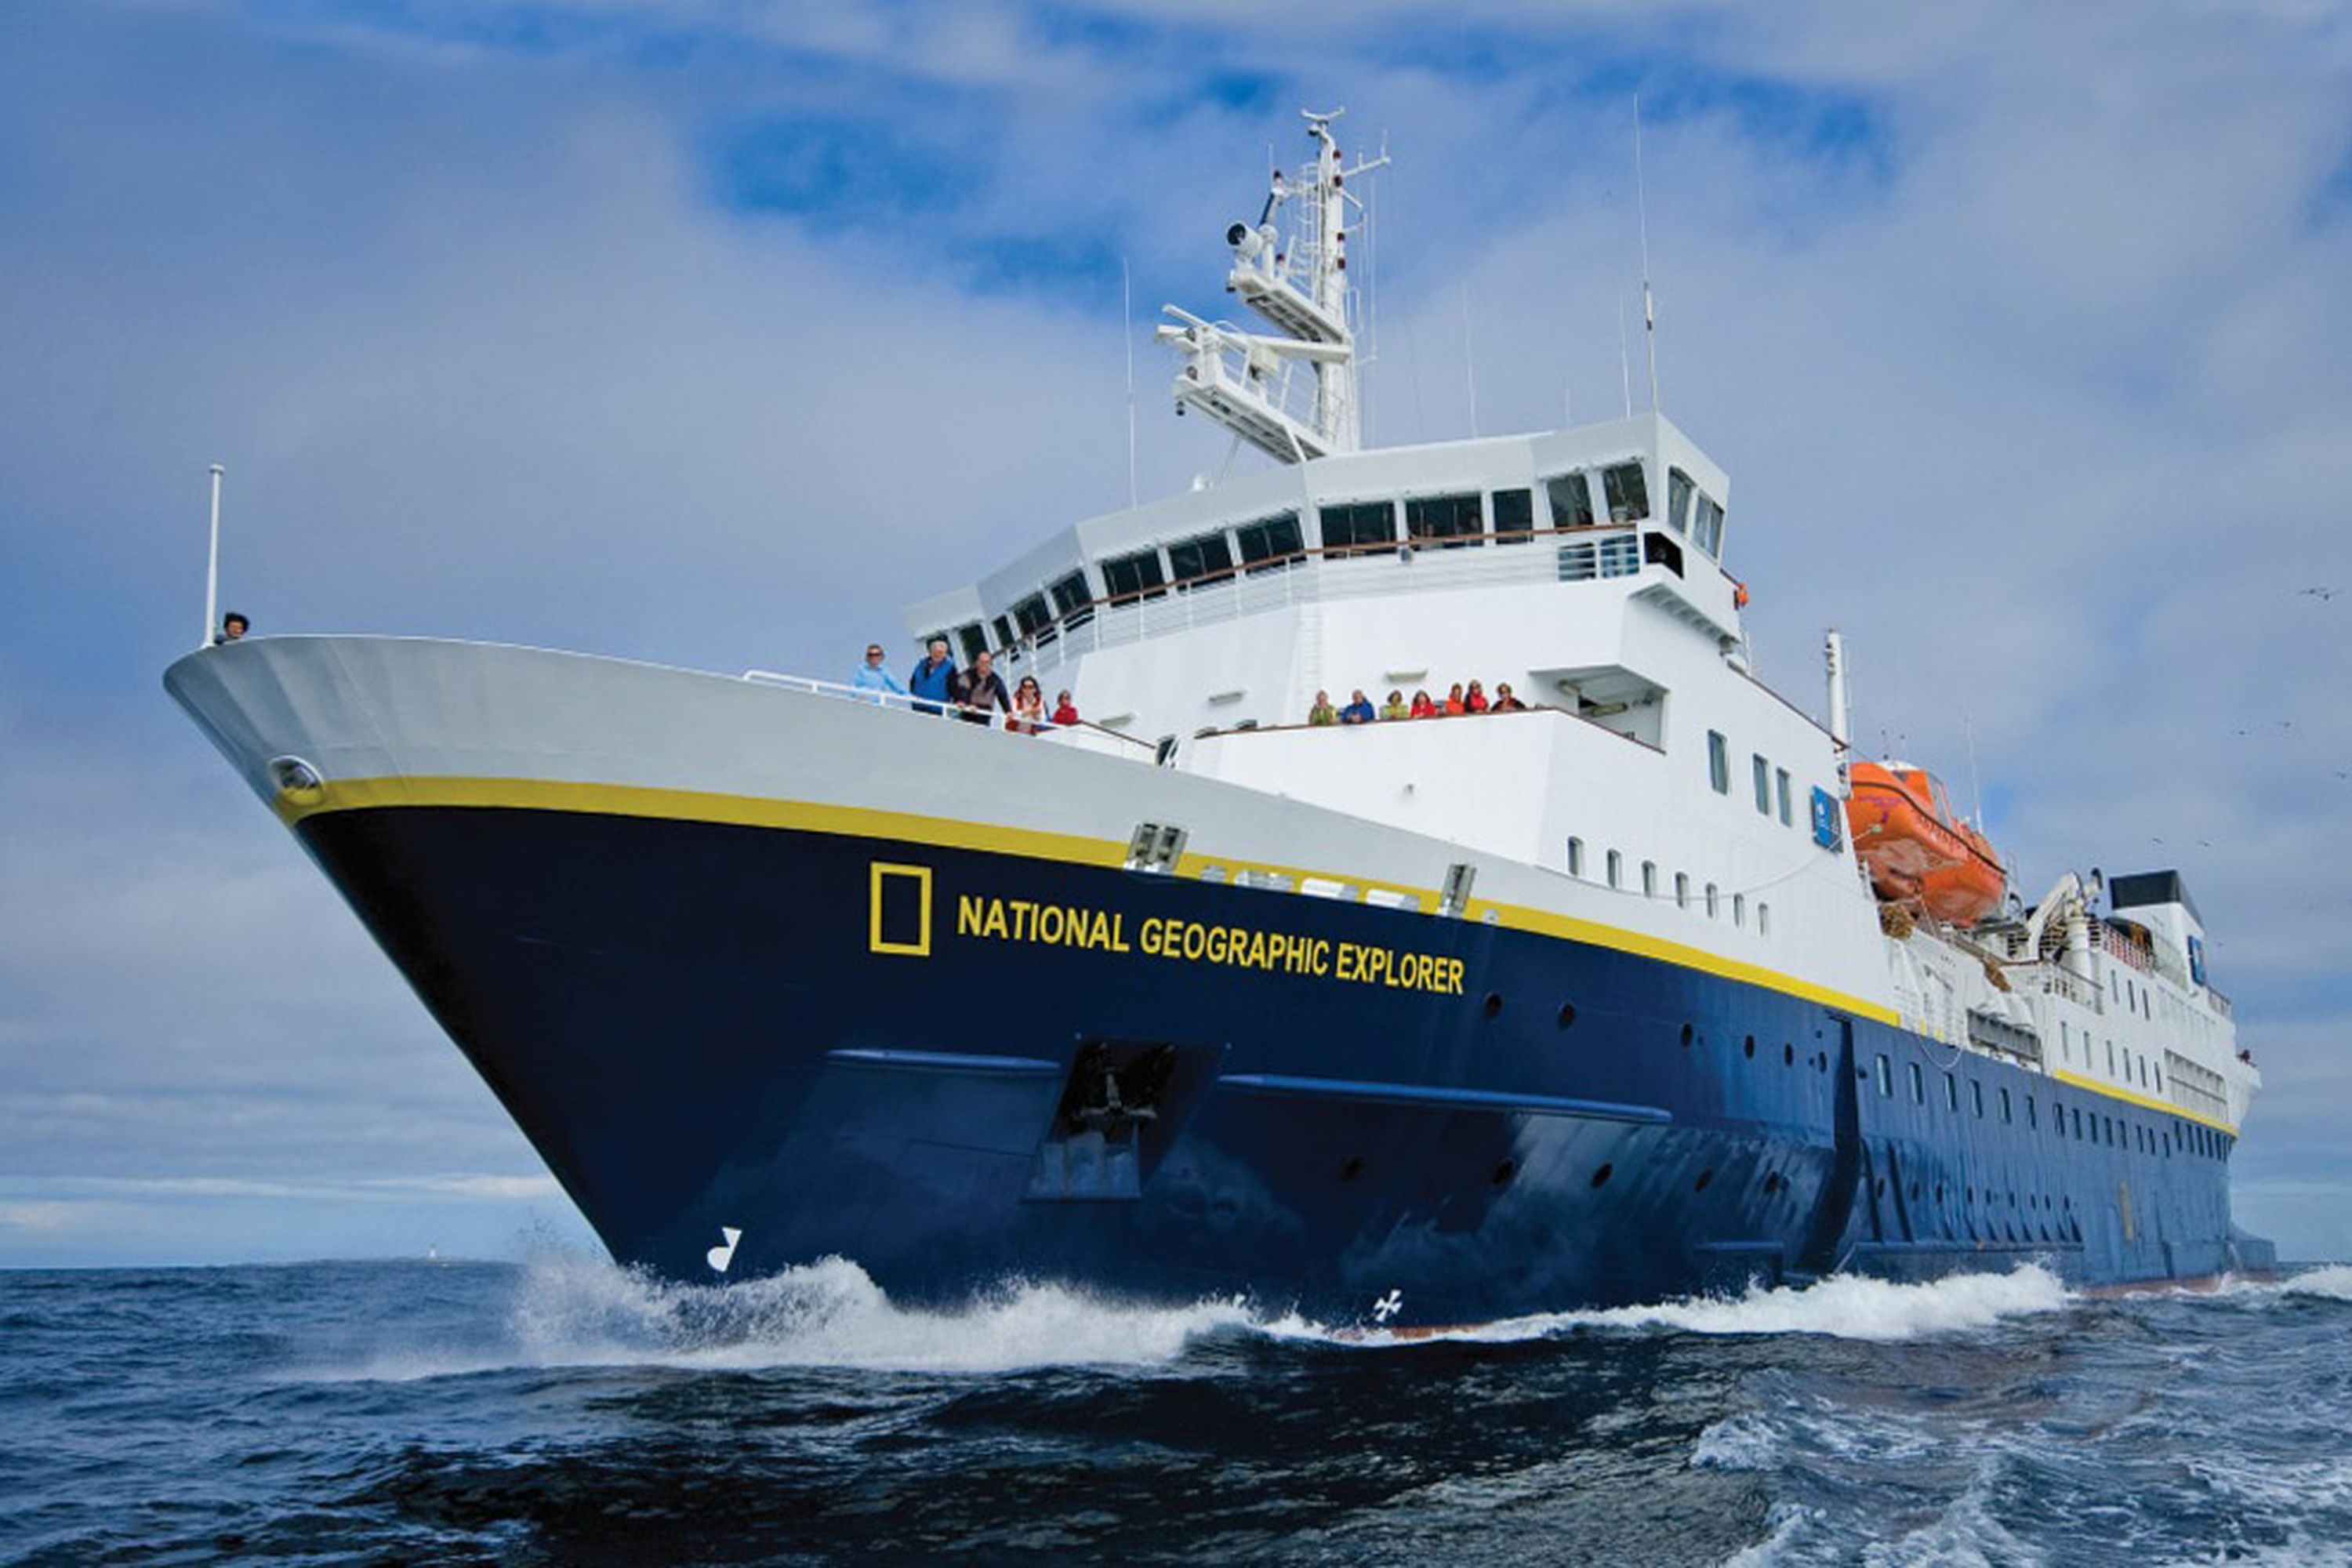 About Lindblad Expeditions